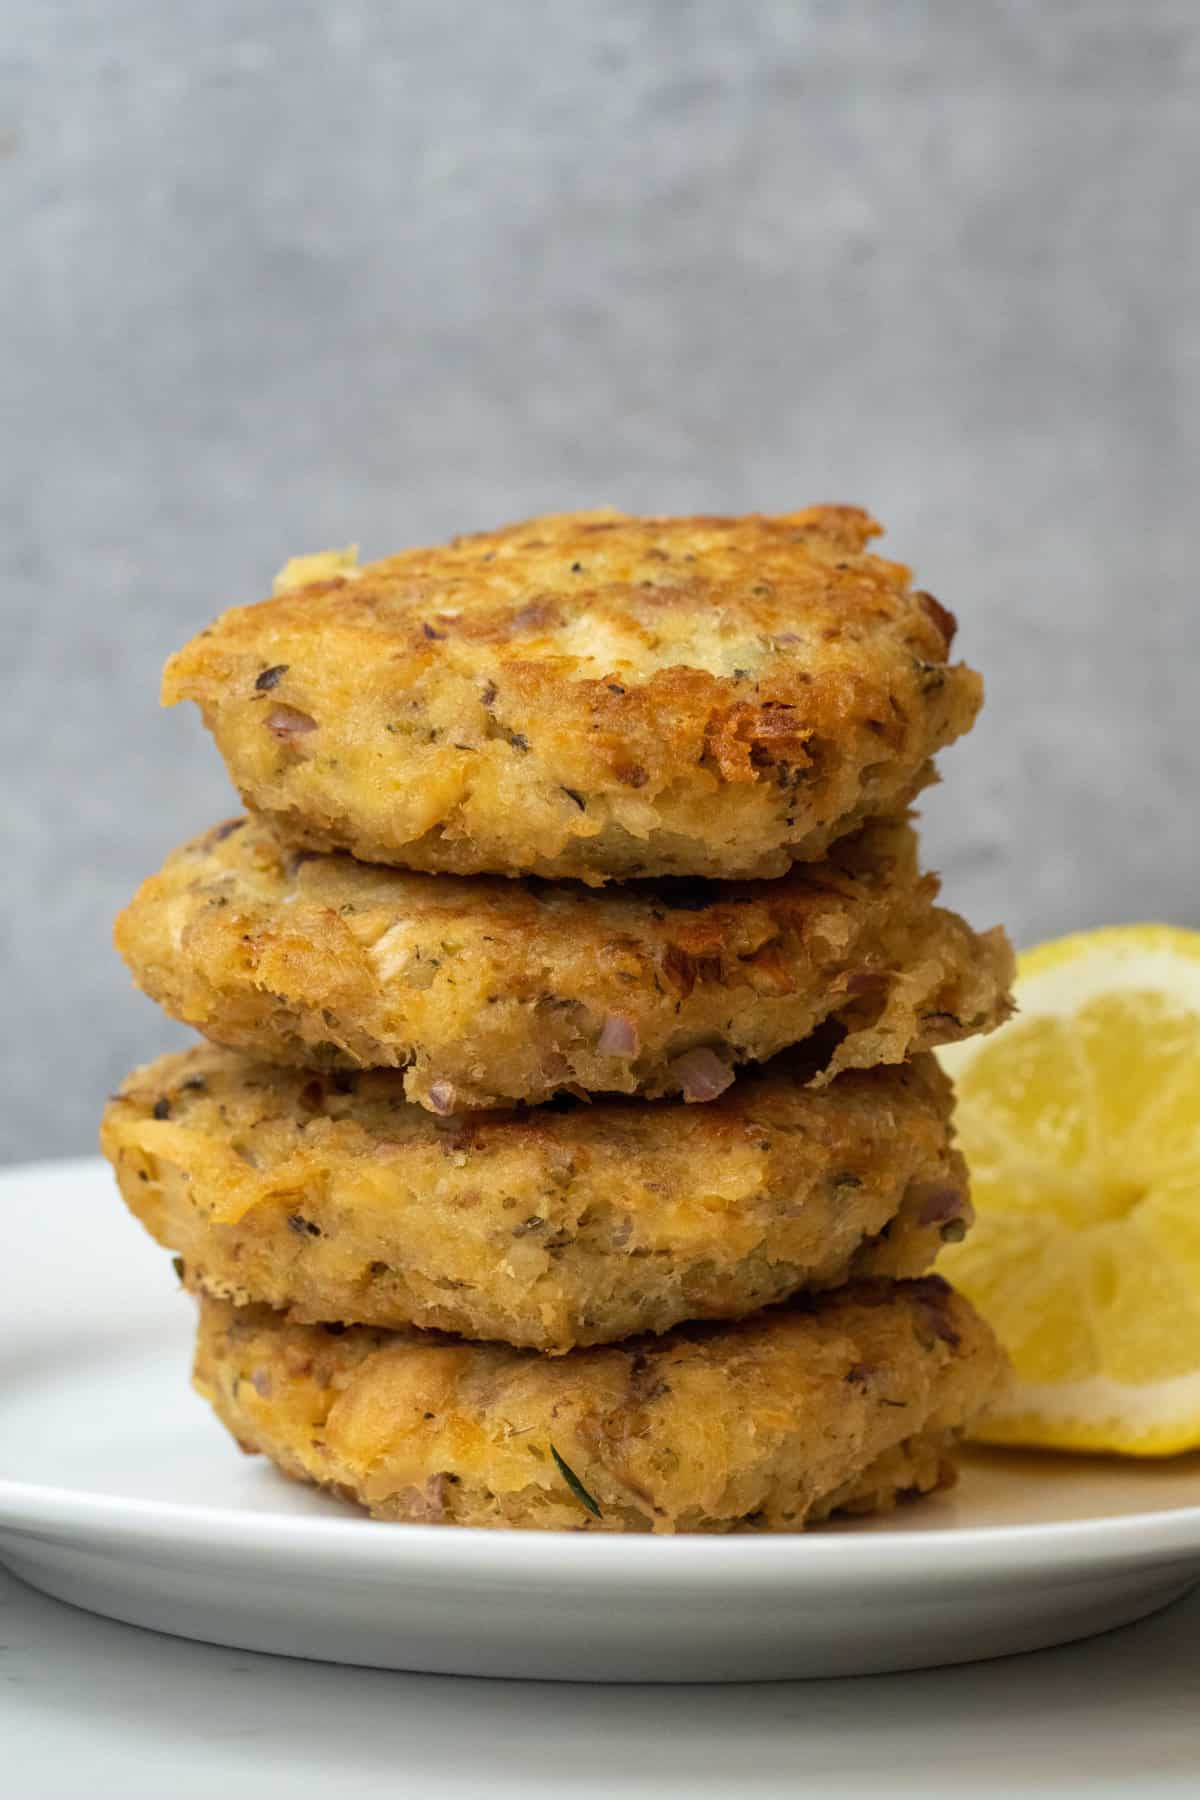 These Tuna Patties Recipe are made with tuna from a can, onion, chives, mayonnaise, crumbs, oregano, vinegar and baked to perfection. 